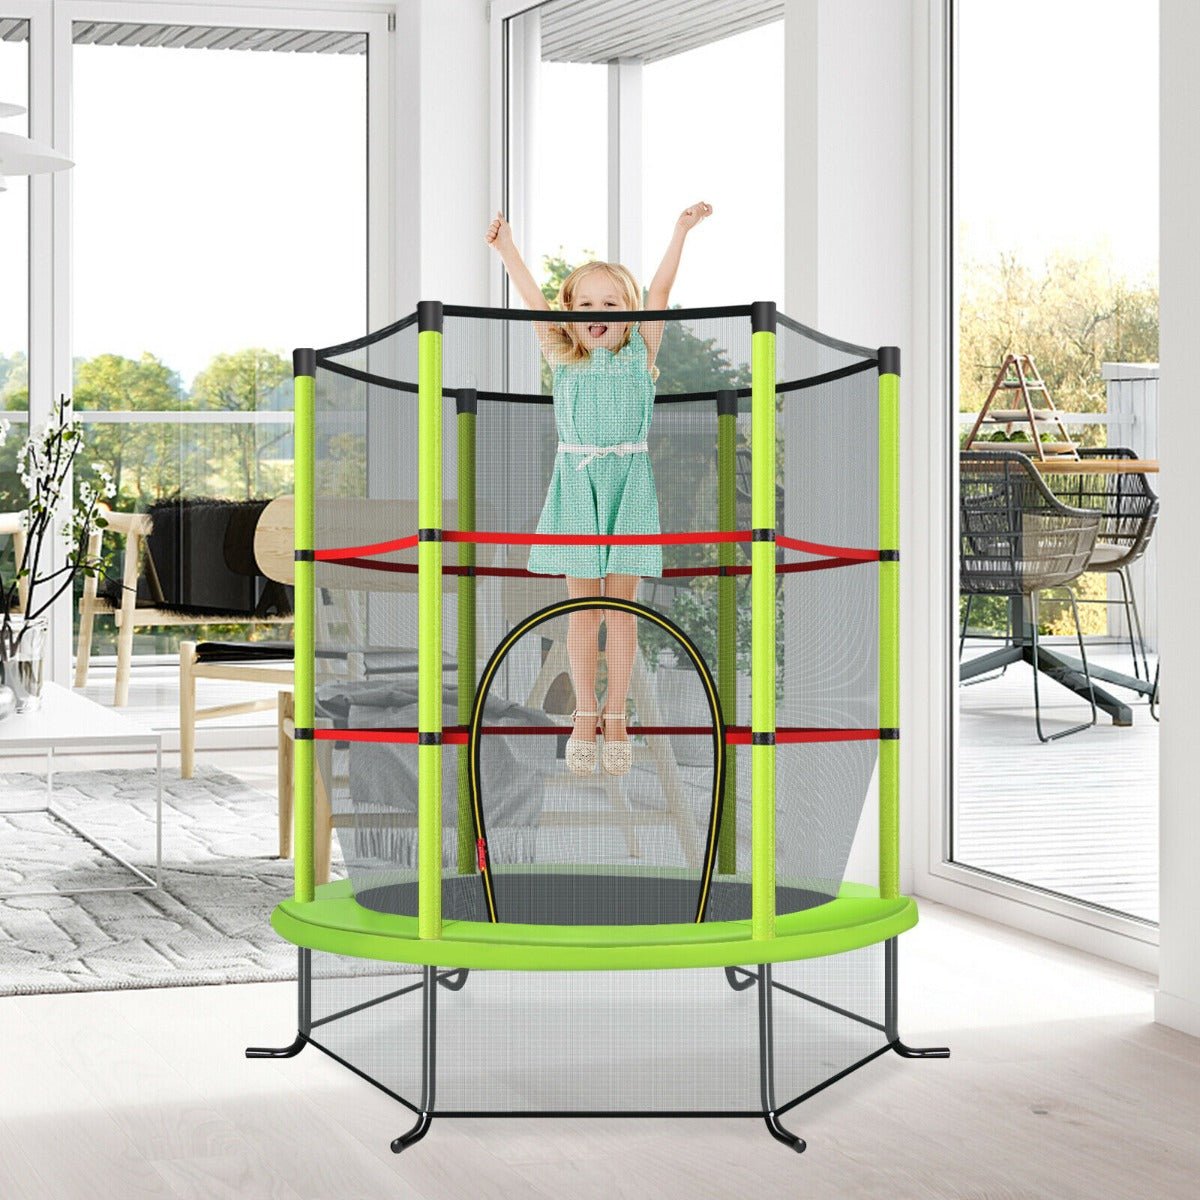 Jump into Joy: Mini Trampoline with Enclosure Net in Fresh Green